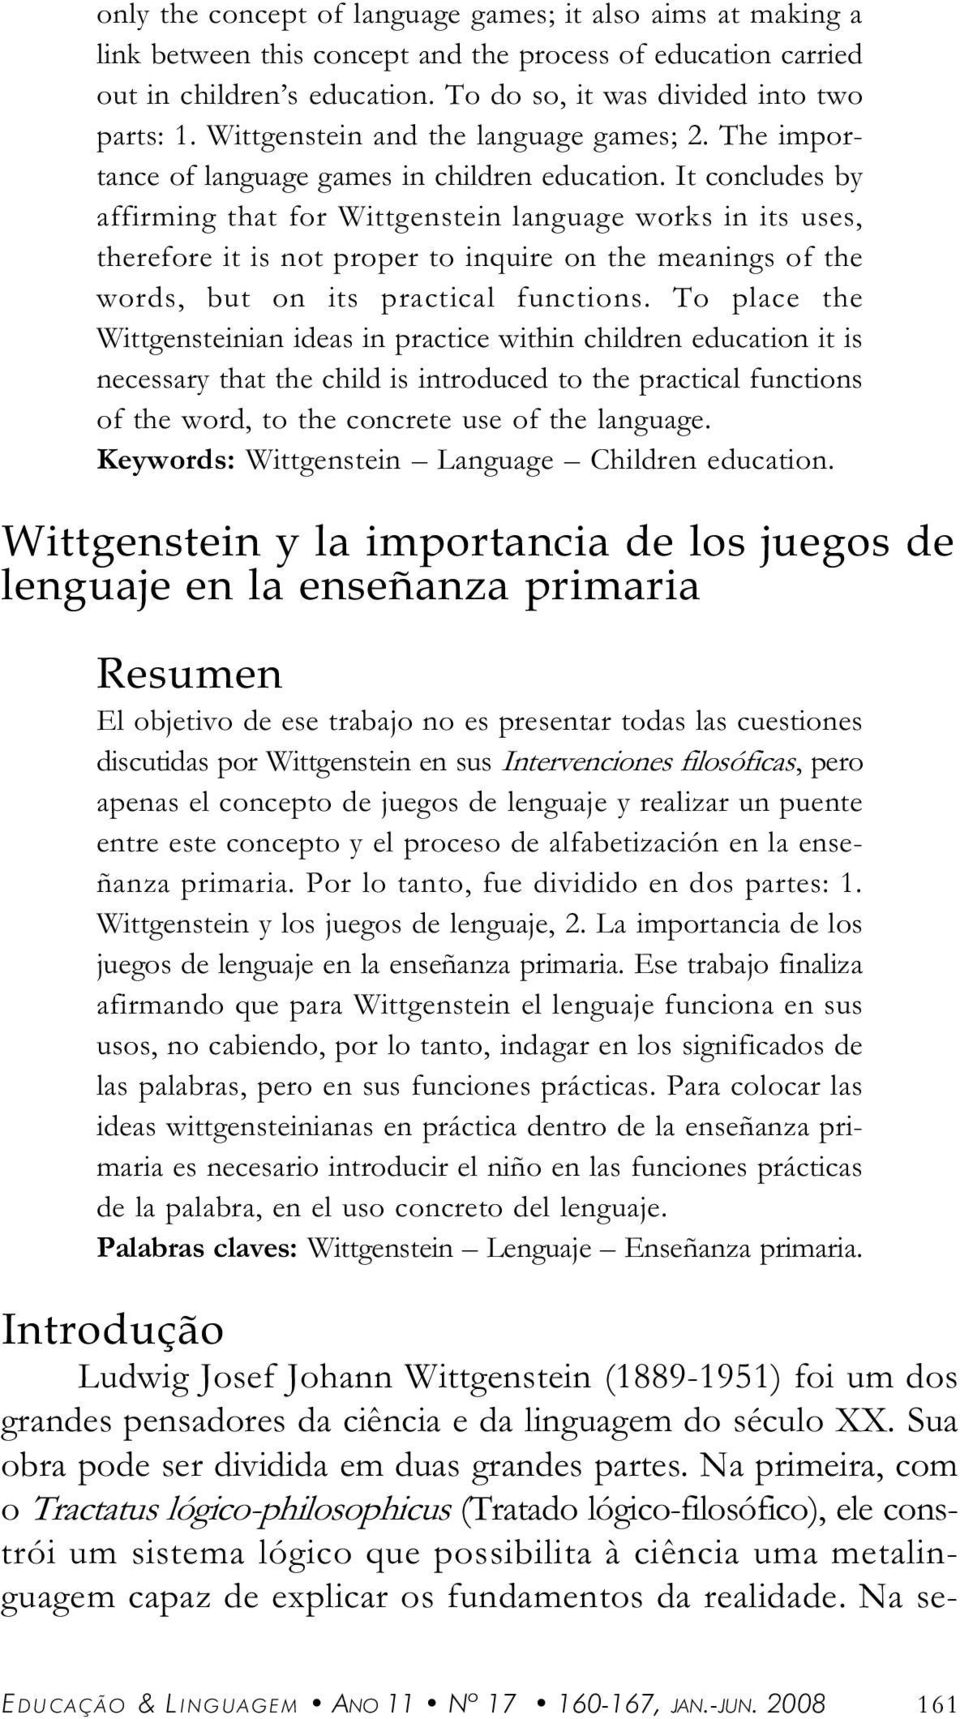 It concludes by ffirming tht for Wittgenstein lnguge works in its uses, therefore it is not proper to inquire on the menings of the words, but on its prcticl functions.